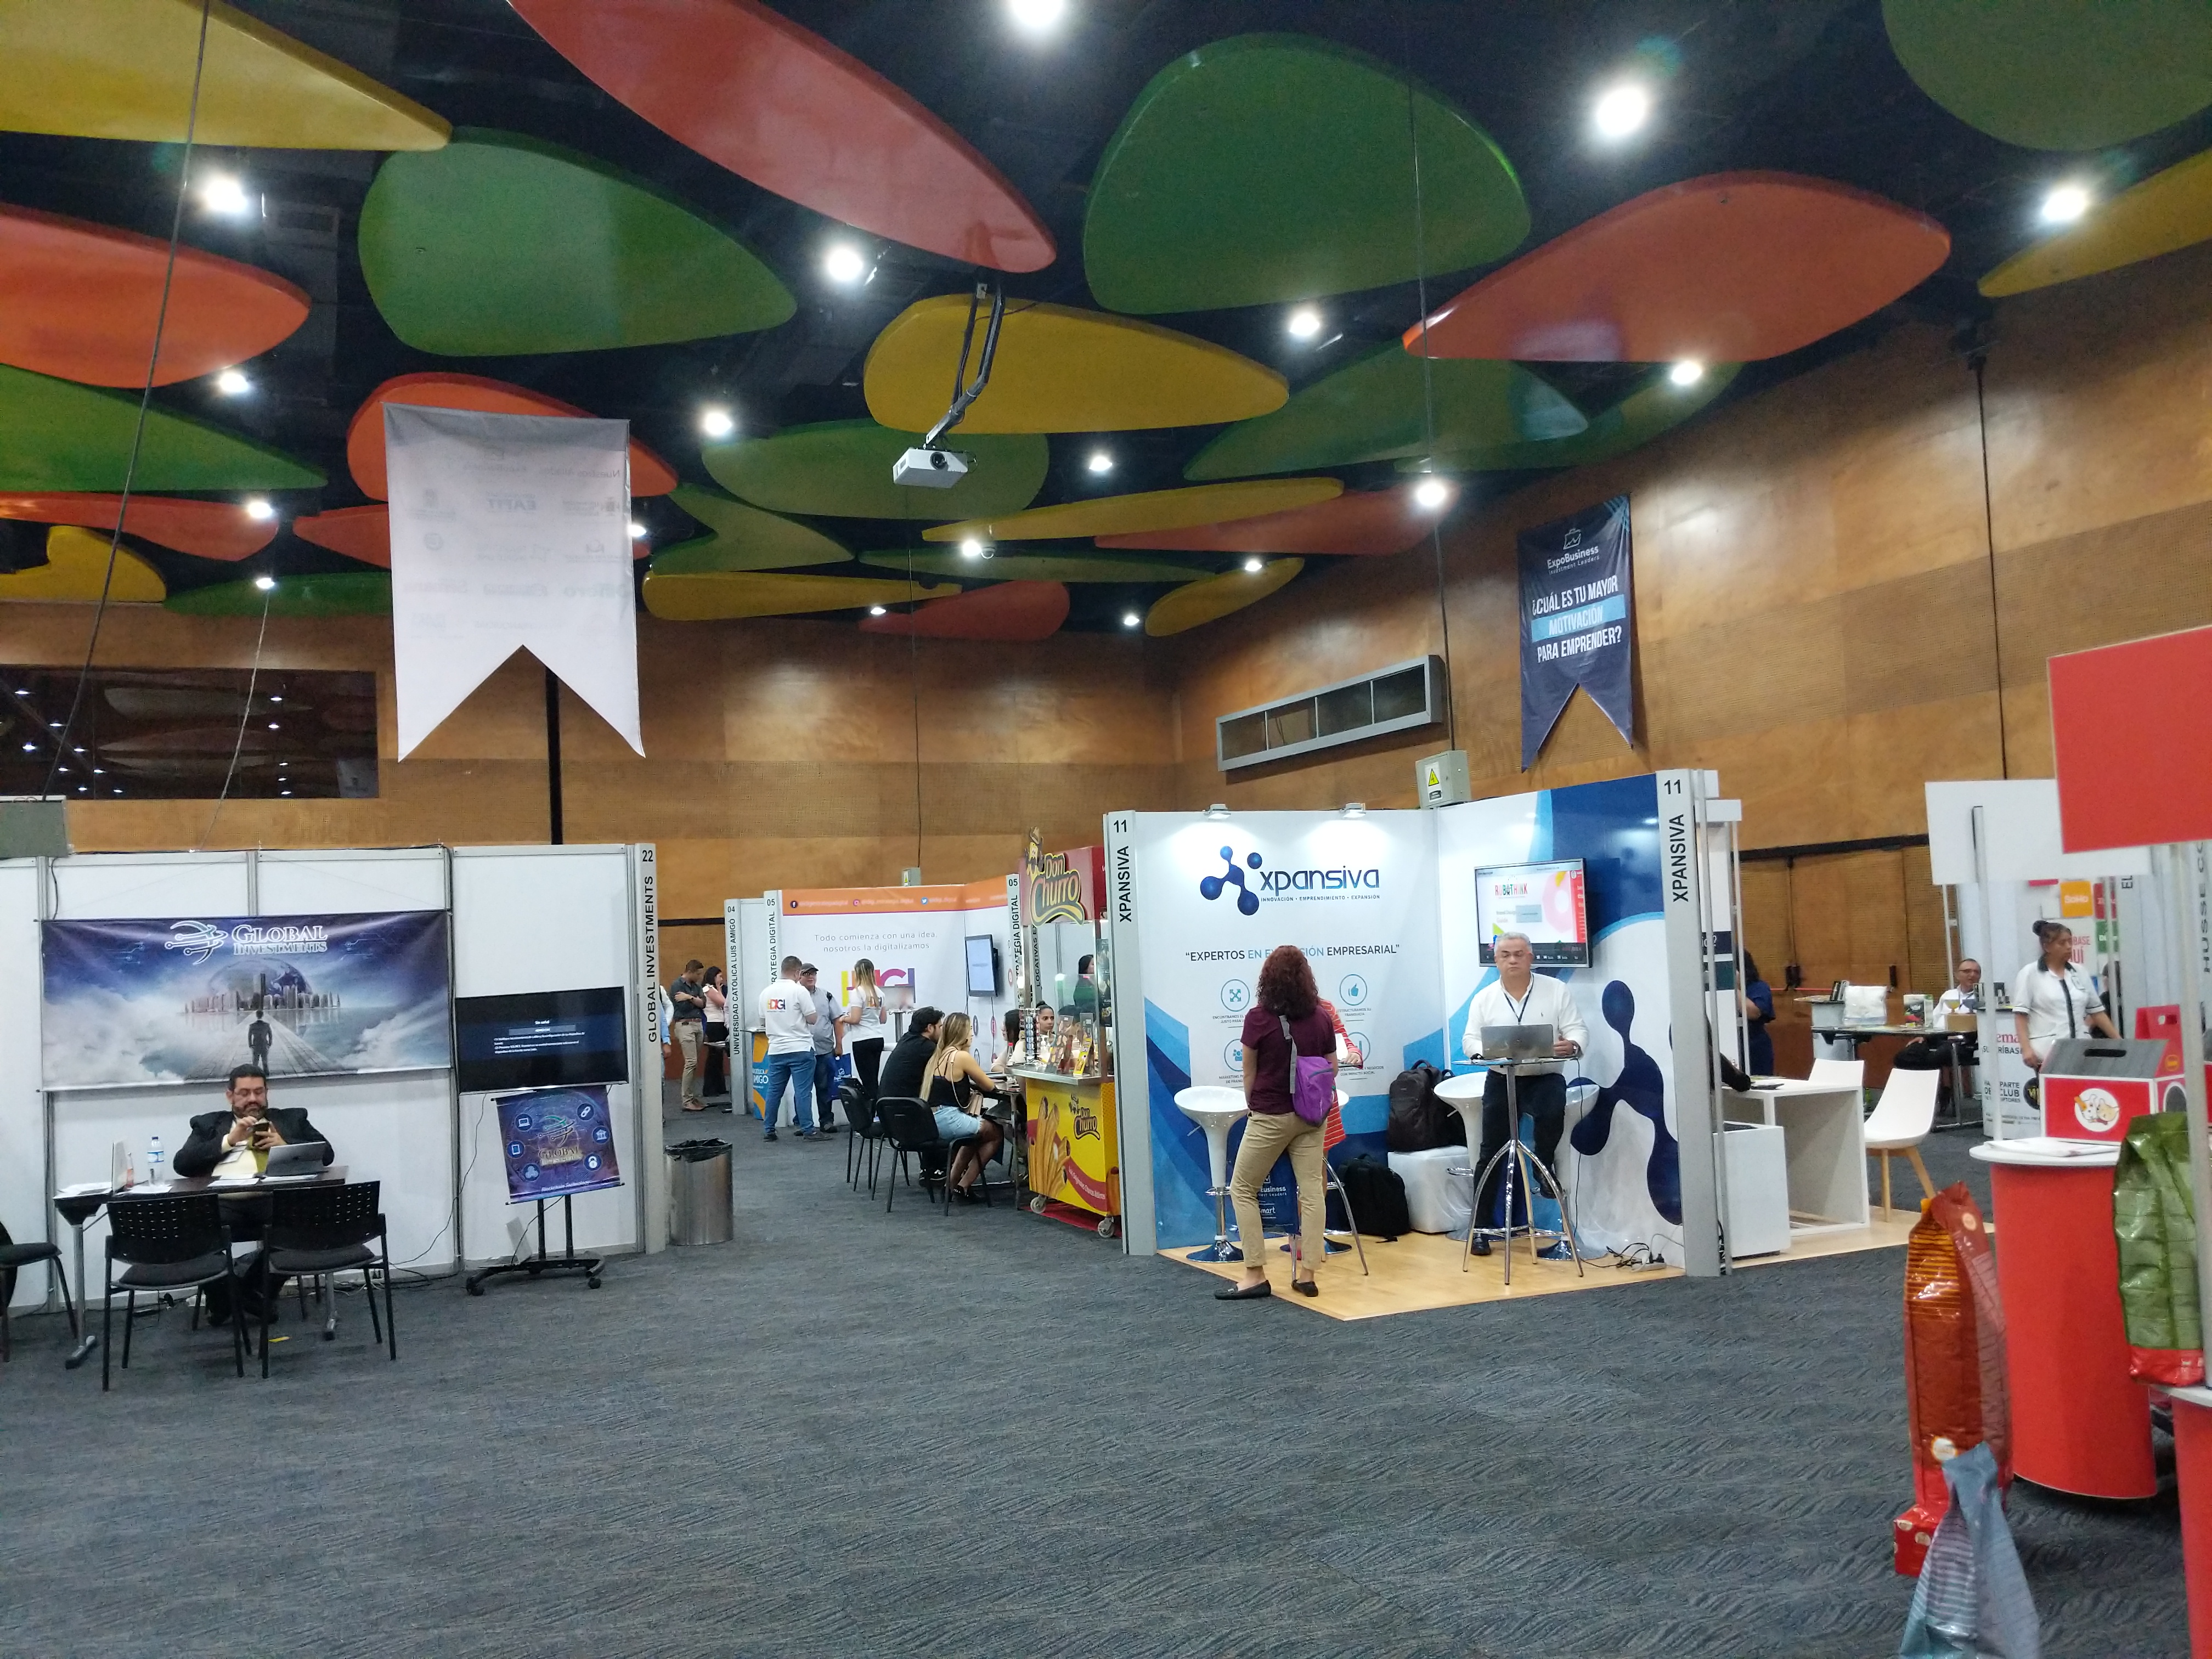 Expobusiness 2018 Highlights Colombia's Entrepreneurs of Every Level